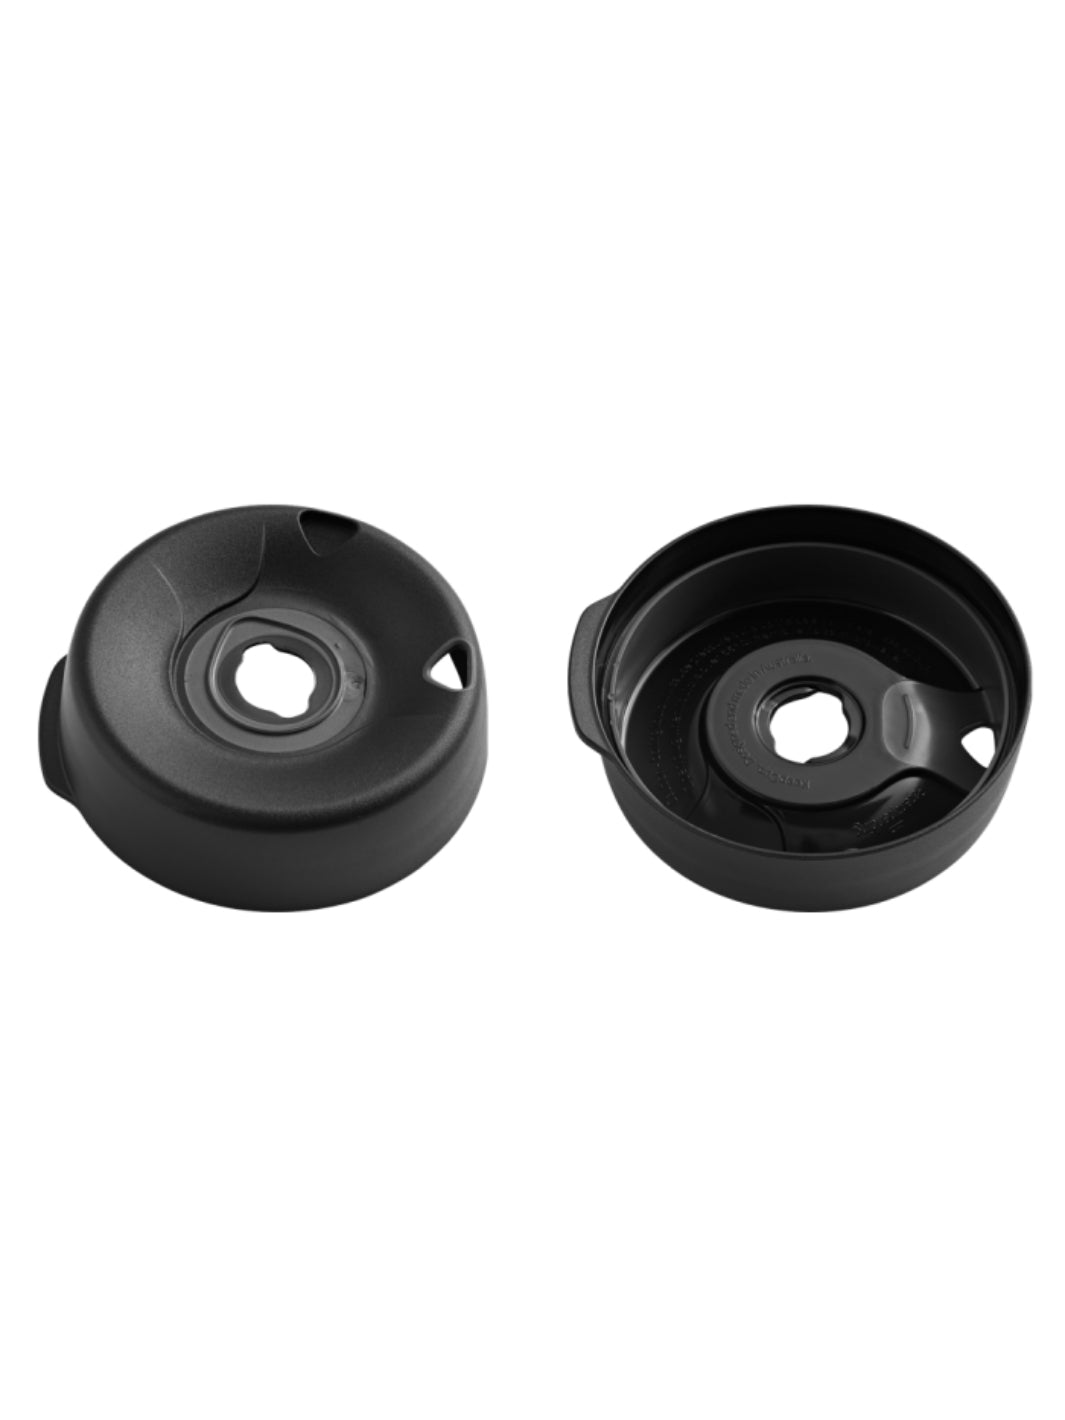 KEEPCUP Replacement Press Fit Lid